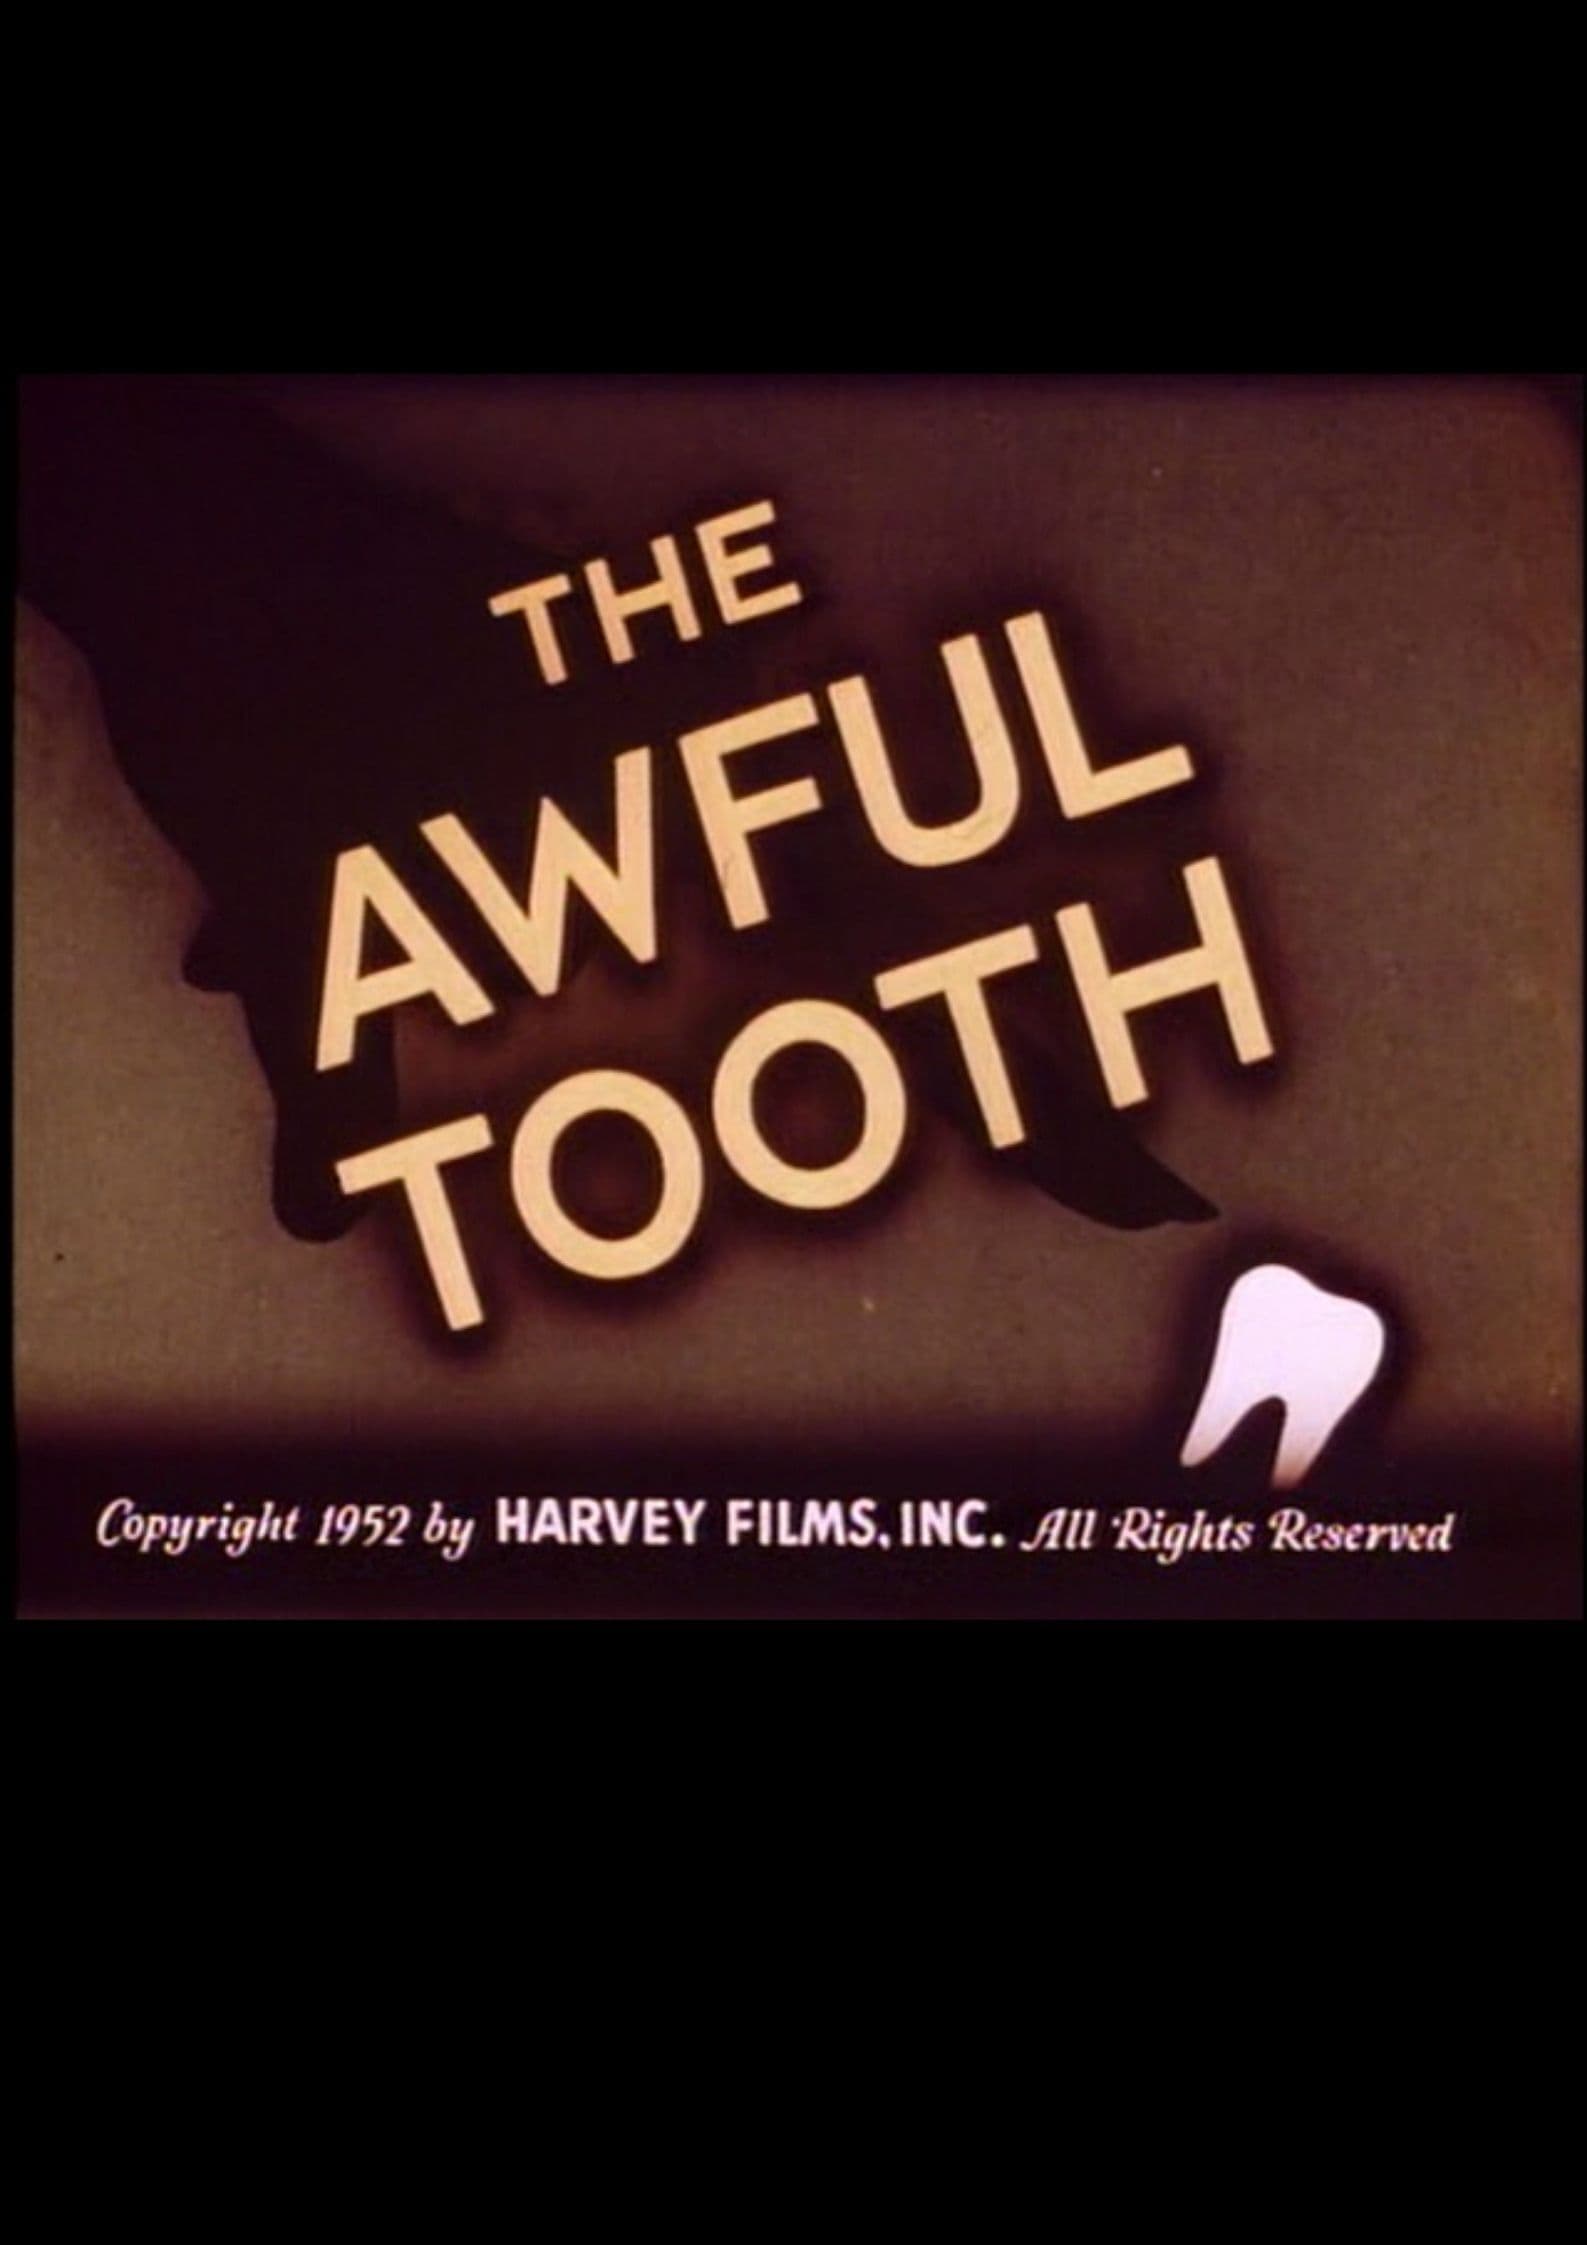 The Awful Tooth